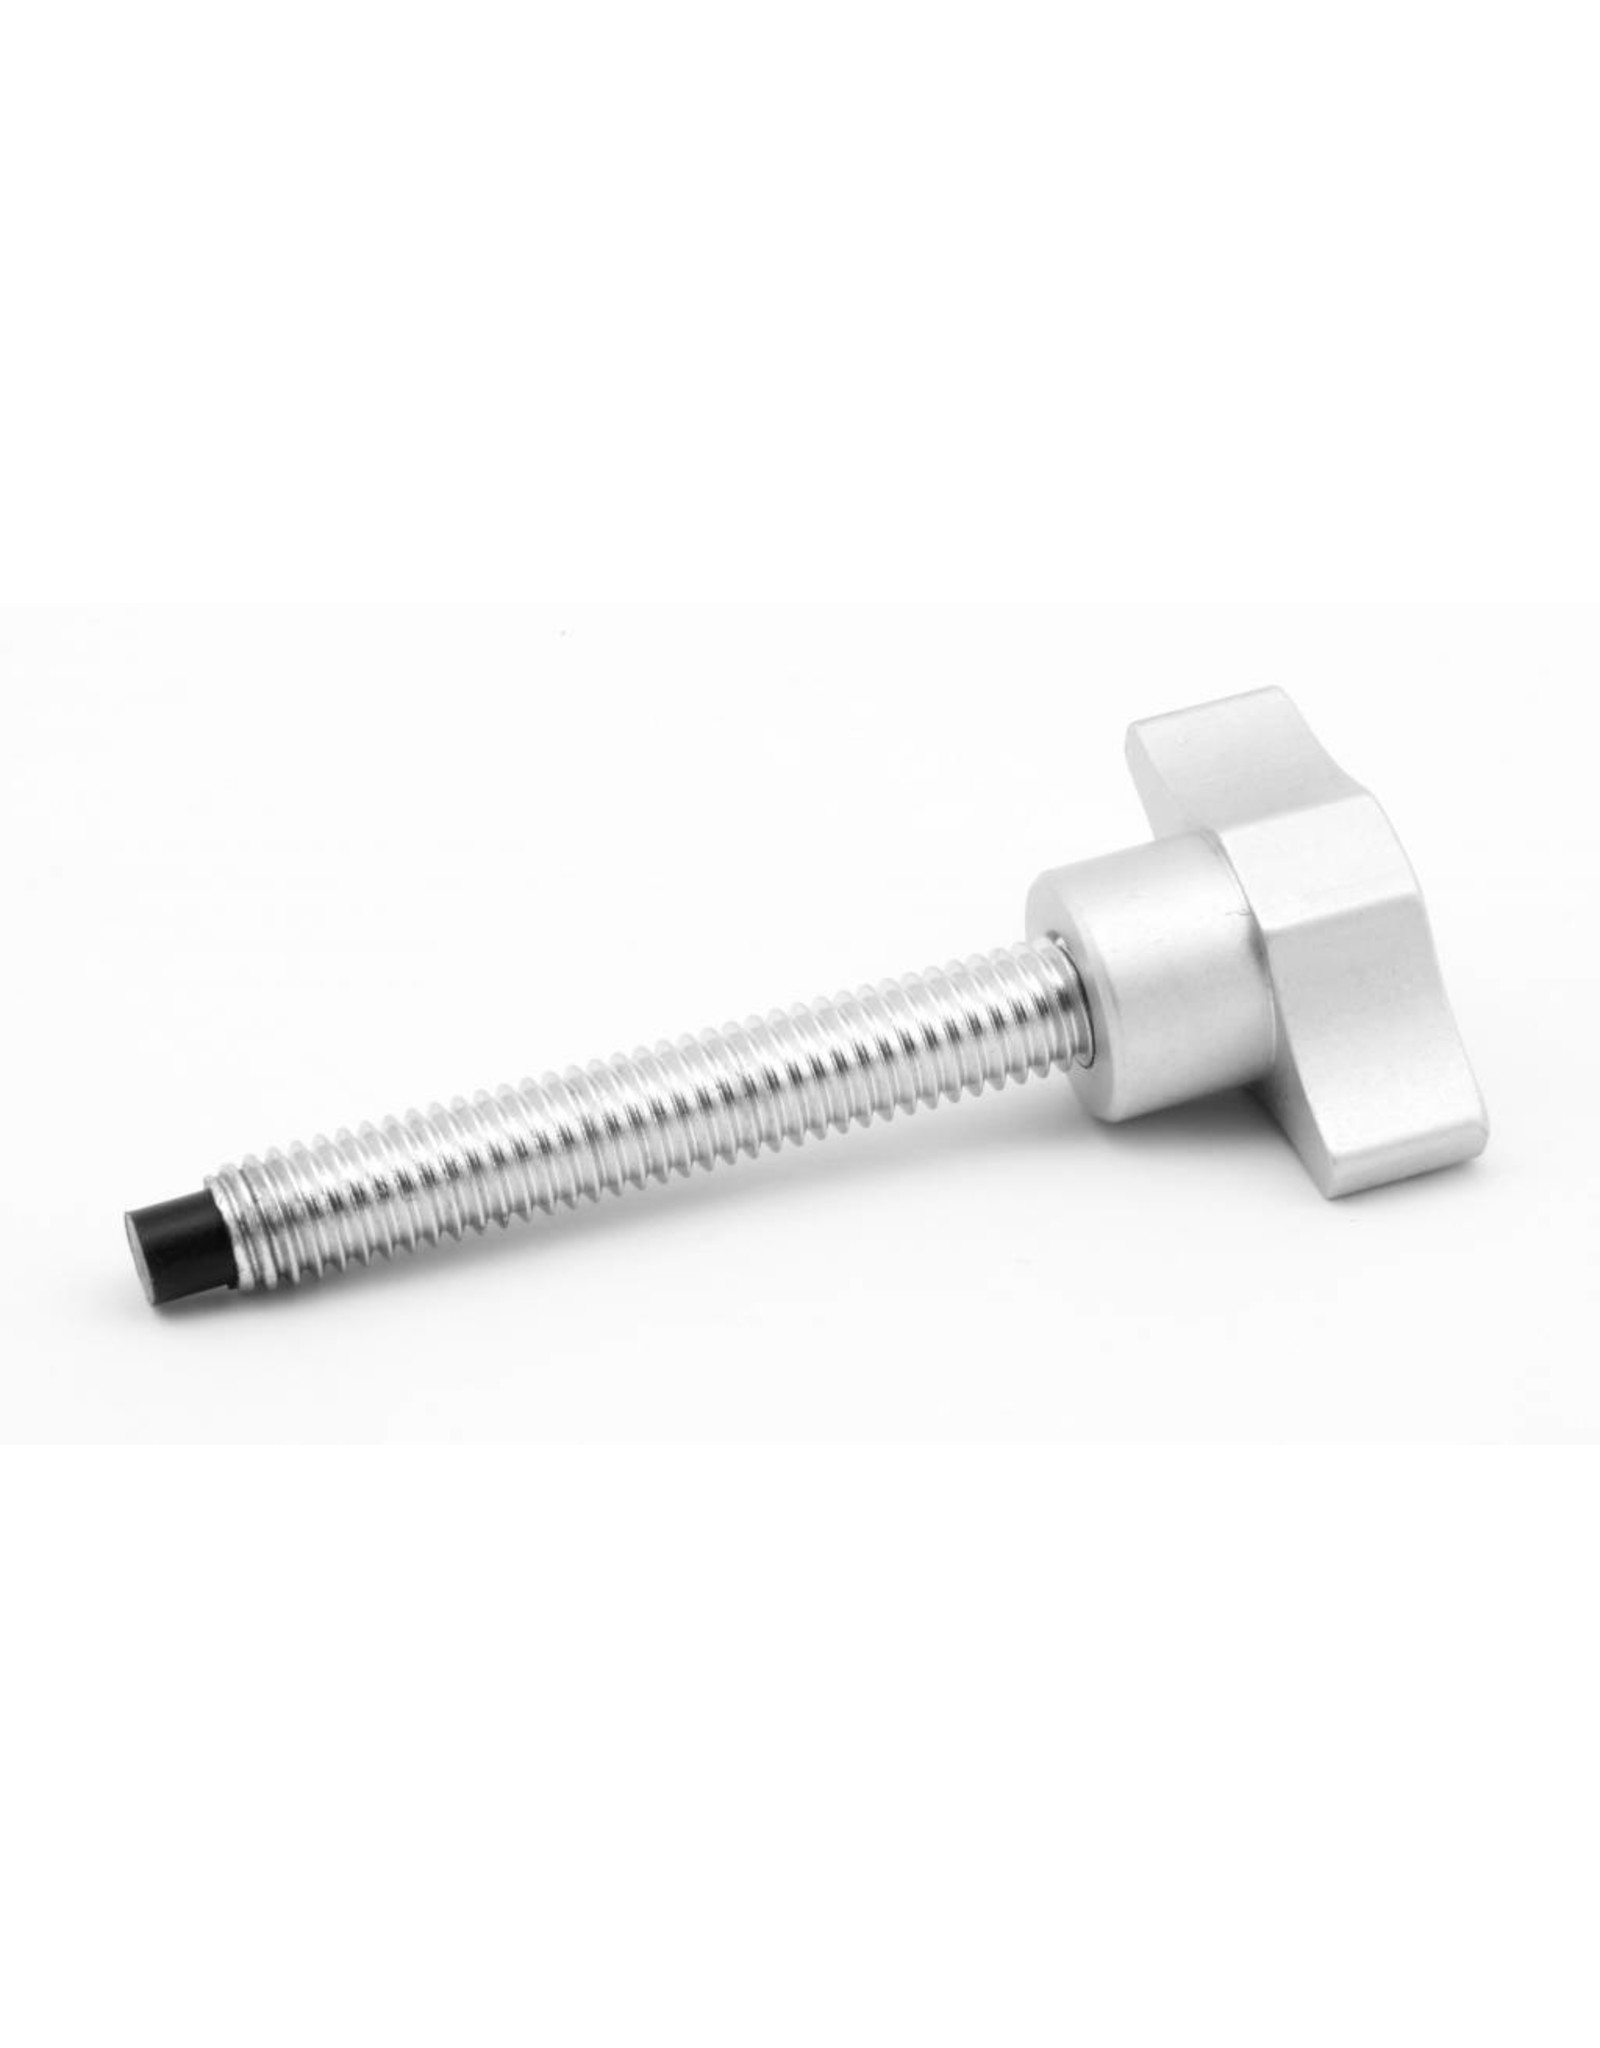 Losmandy Losmandy Counterweight Thumb Screw with Aluminum Knob for 11LB Weight (Includes Small Order Handling Fee of $20)